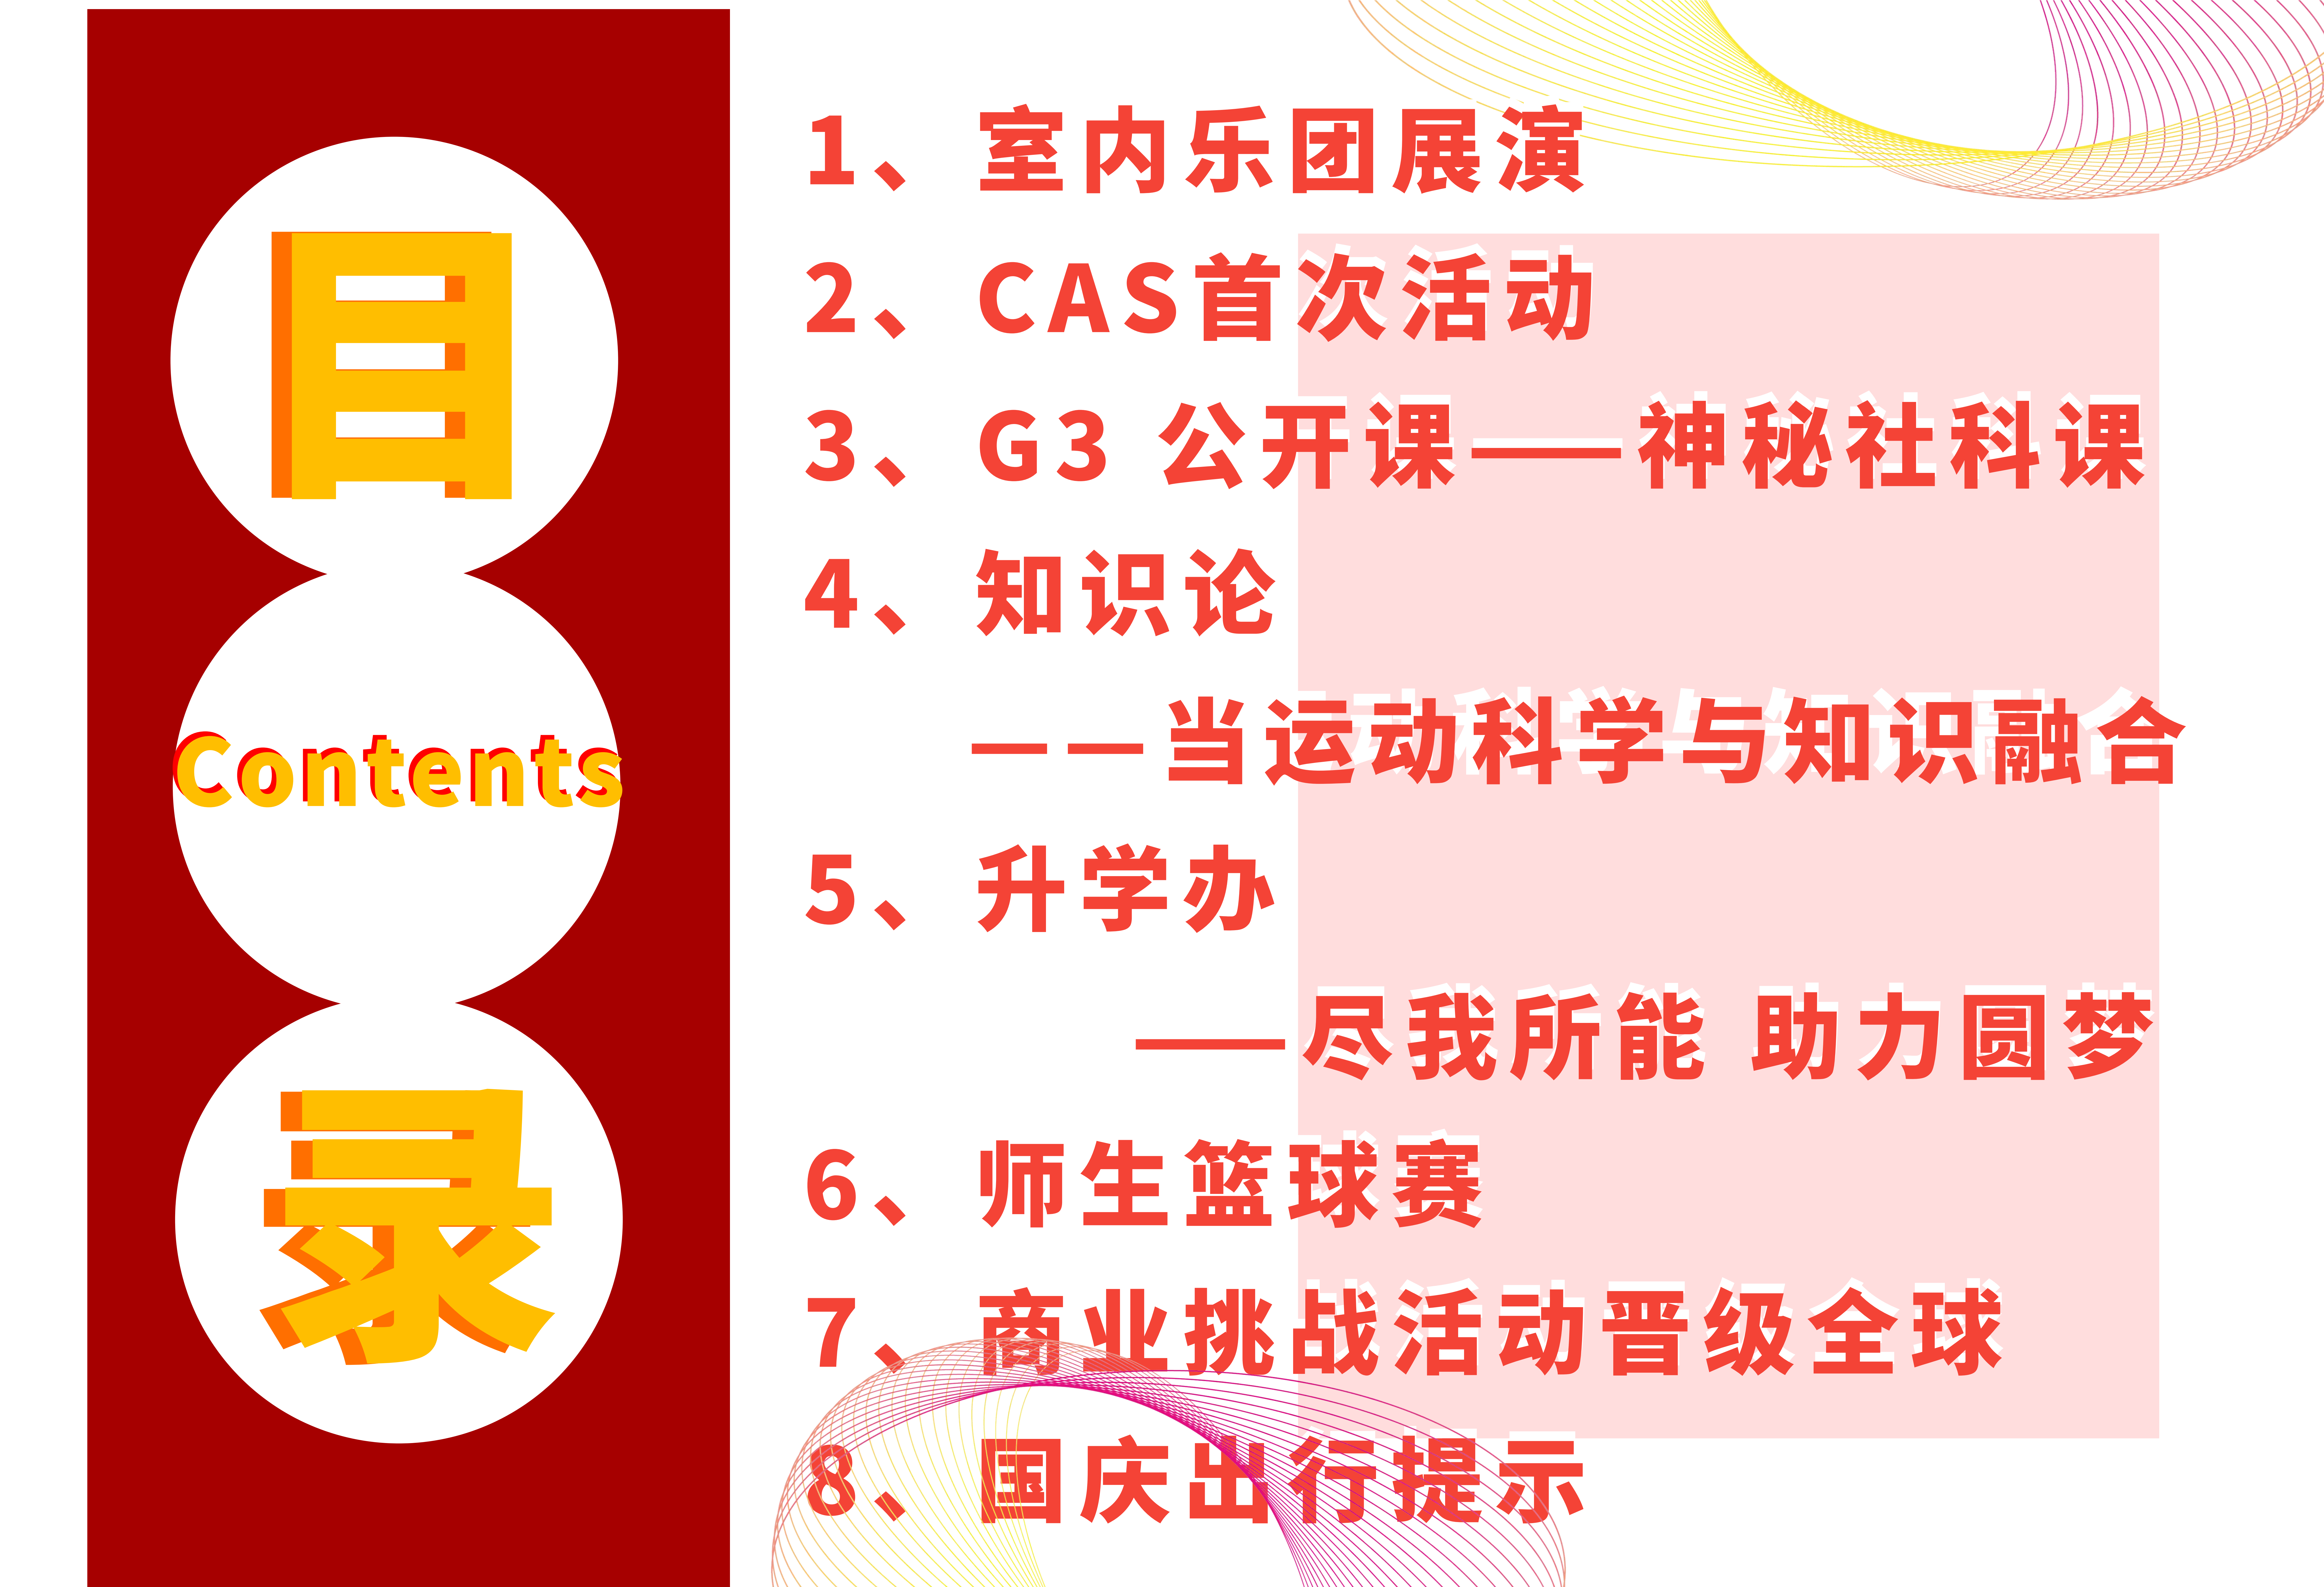 HS 5th Week Newsletter (Chinese 2022-2023 1st semester)_01.png